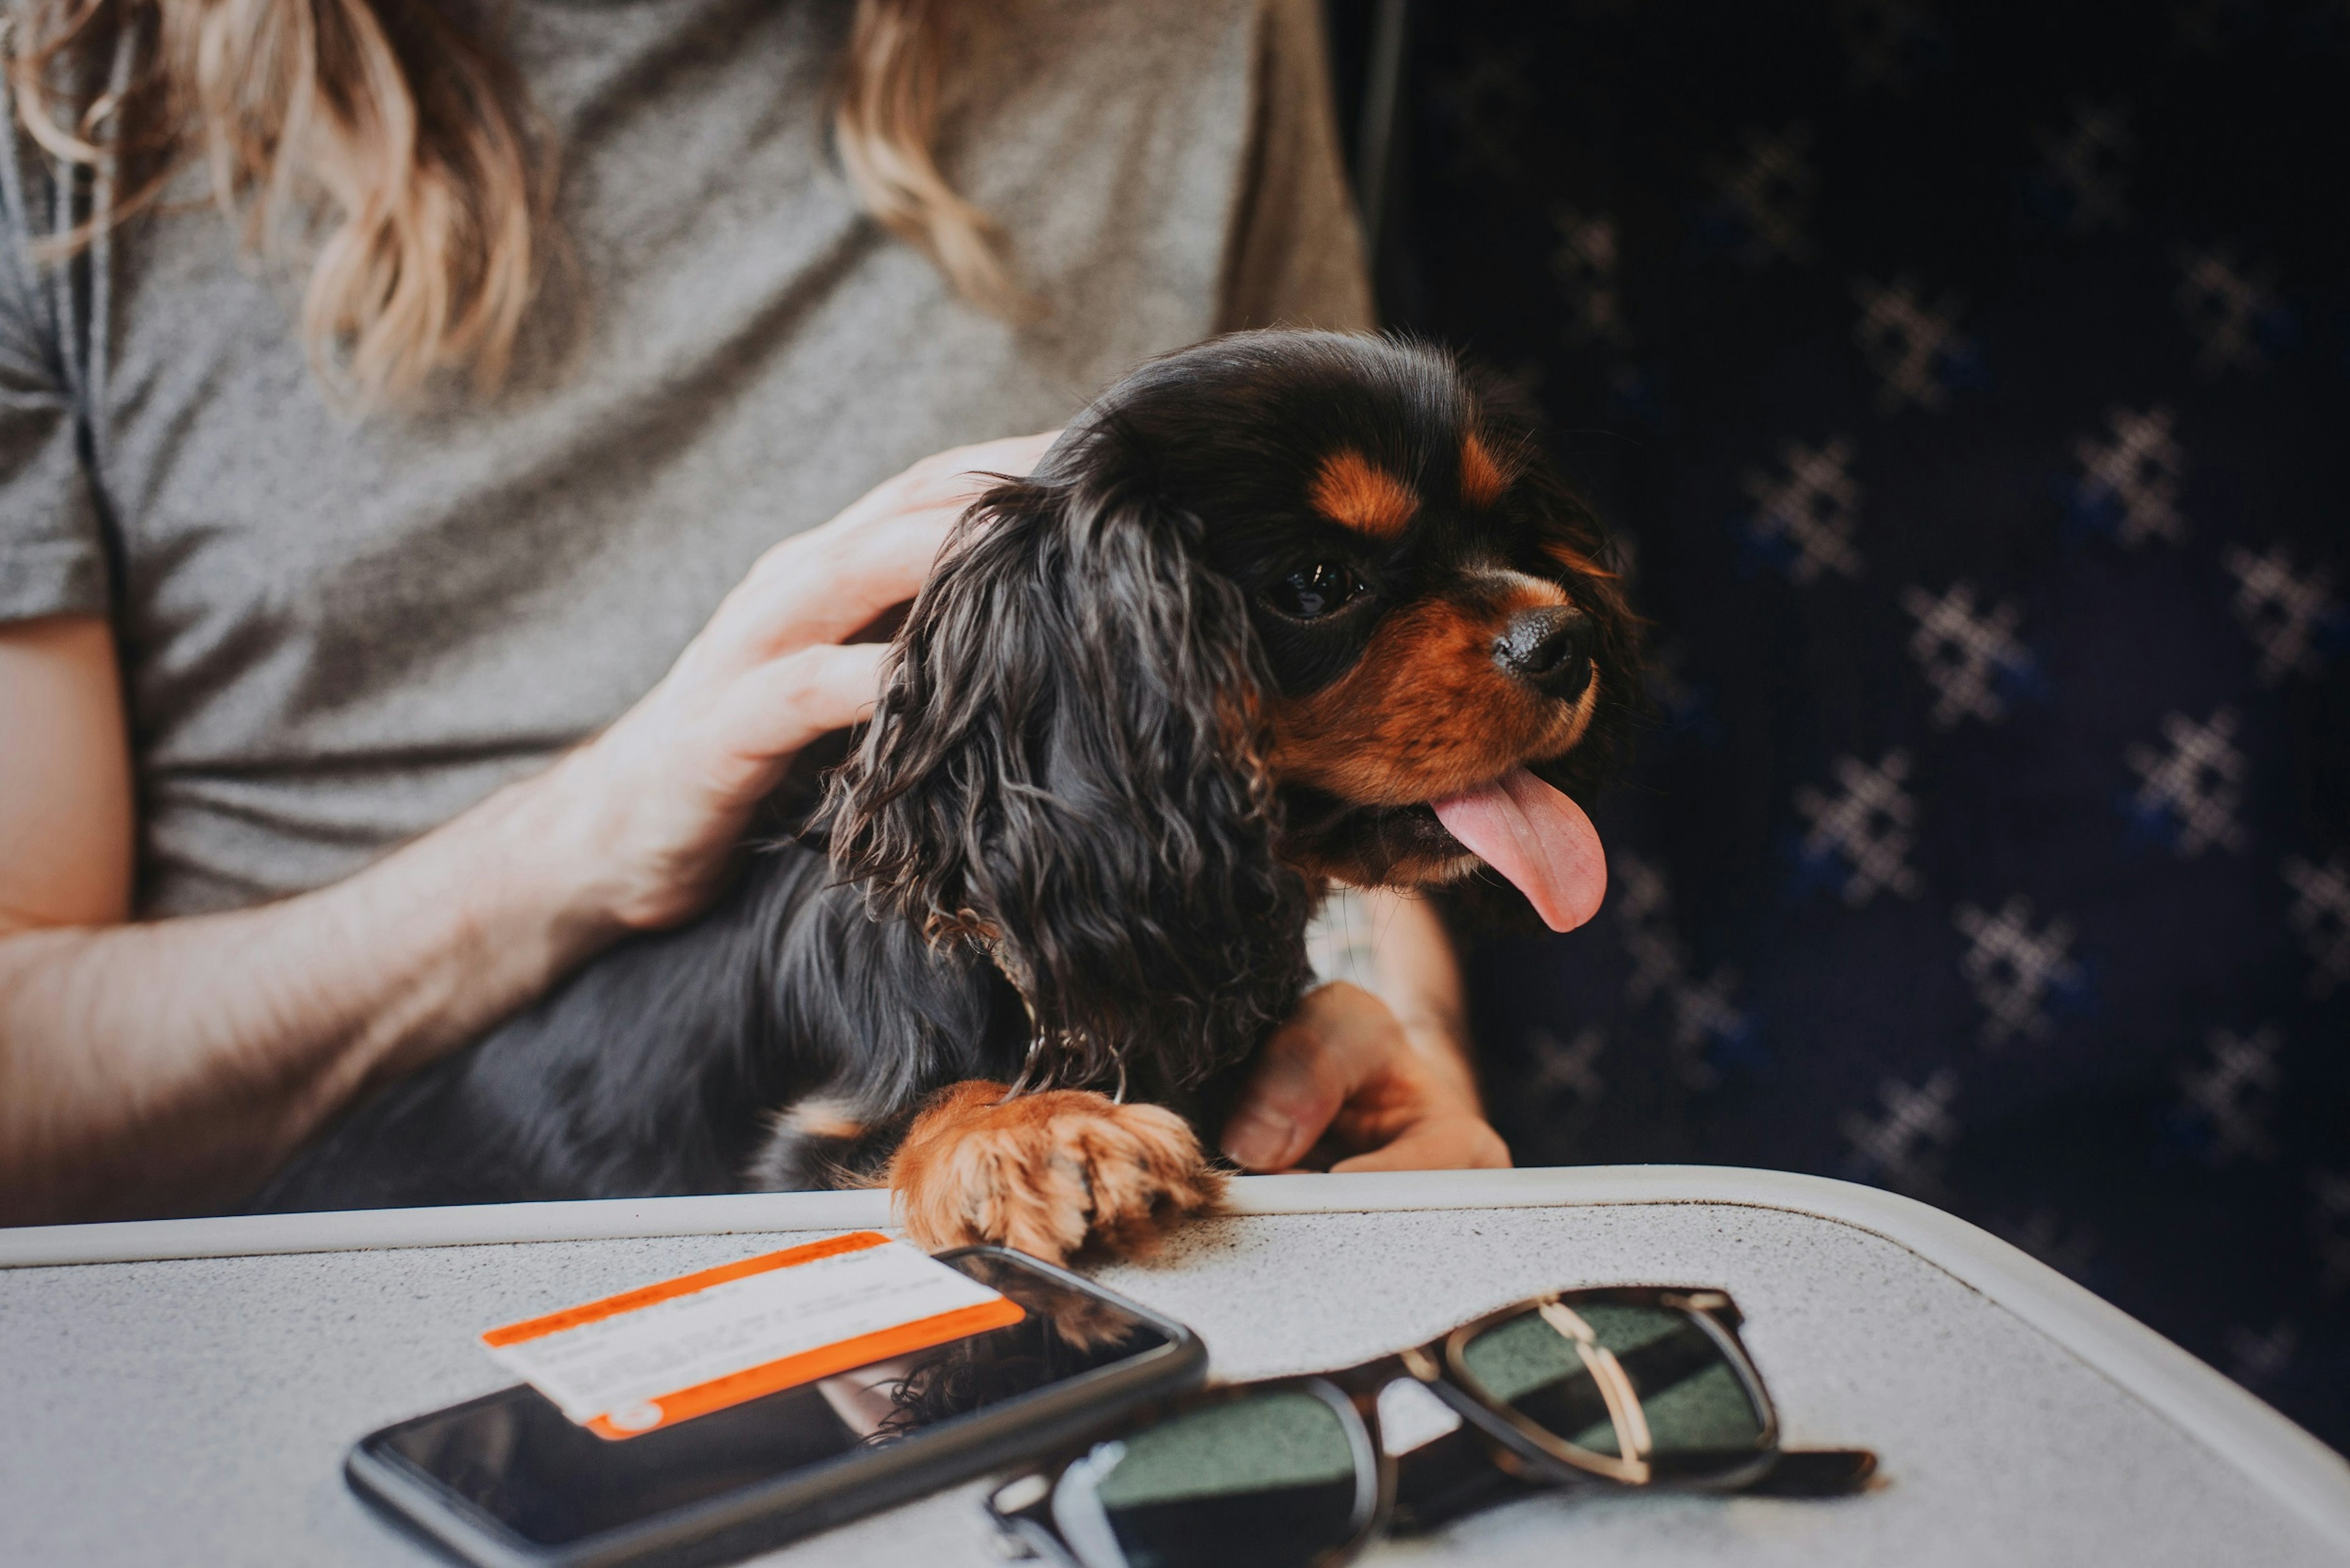 Black and tan Cavalier King Charles Spaniel puppy on a train. He is sitting on his owner's lap with one paw on the table in front of him. Sunglasses, mobile phone and train ticket on the table.